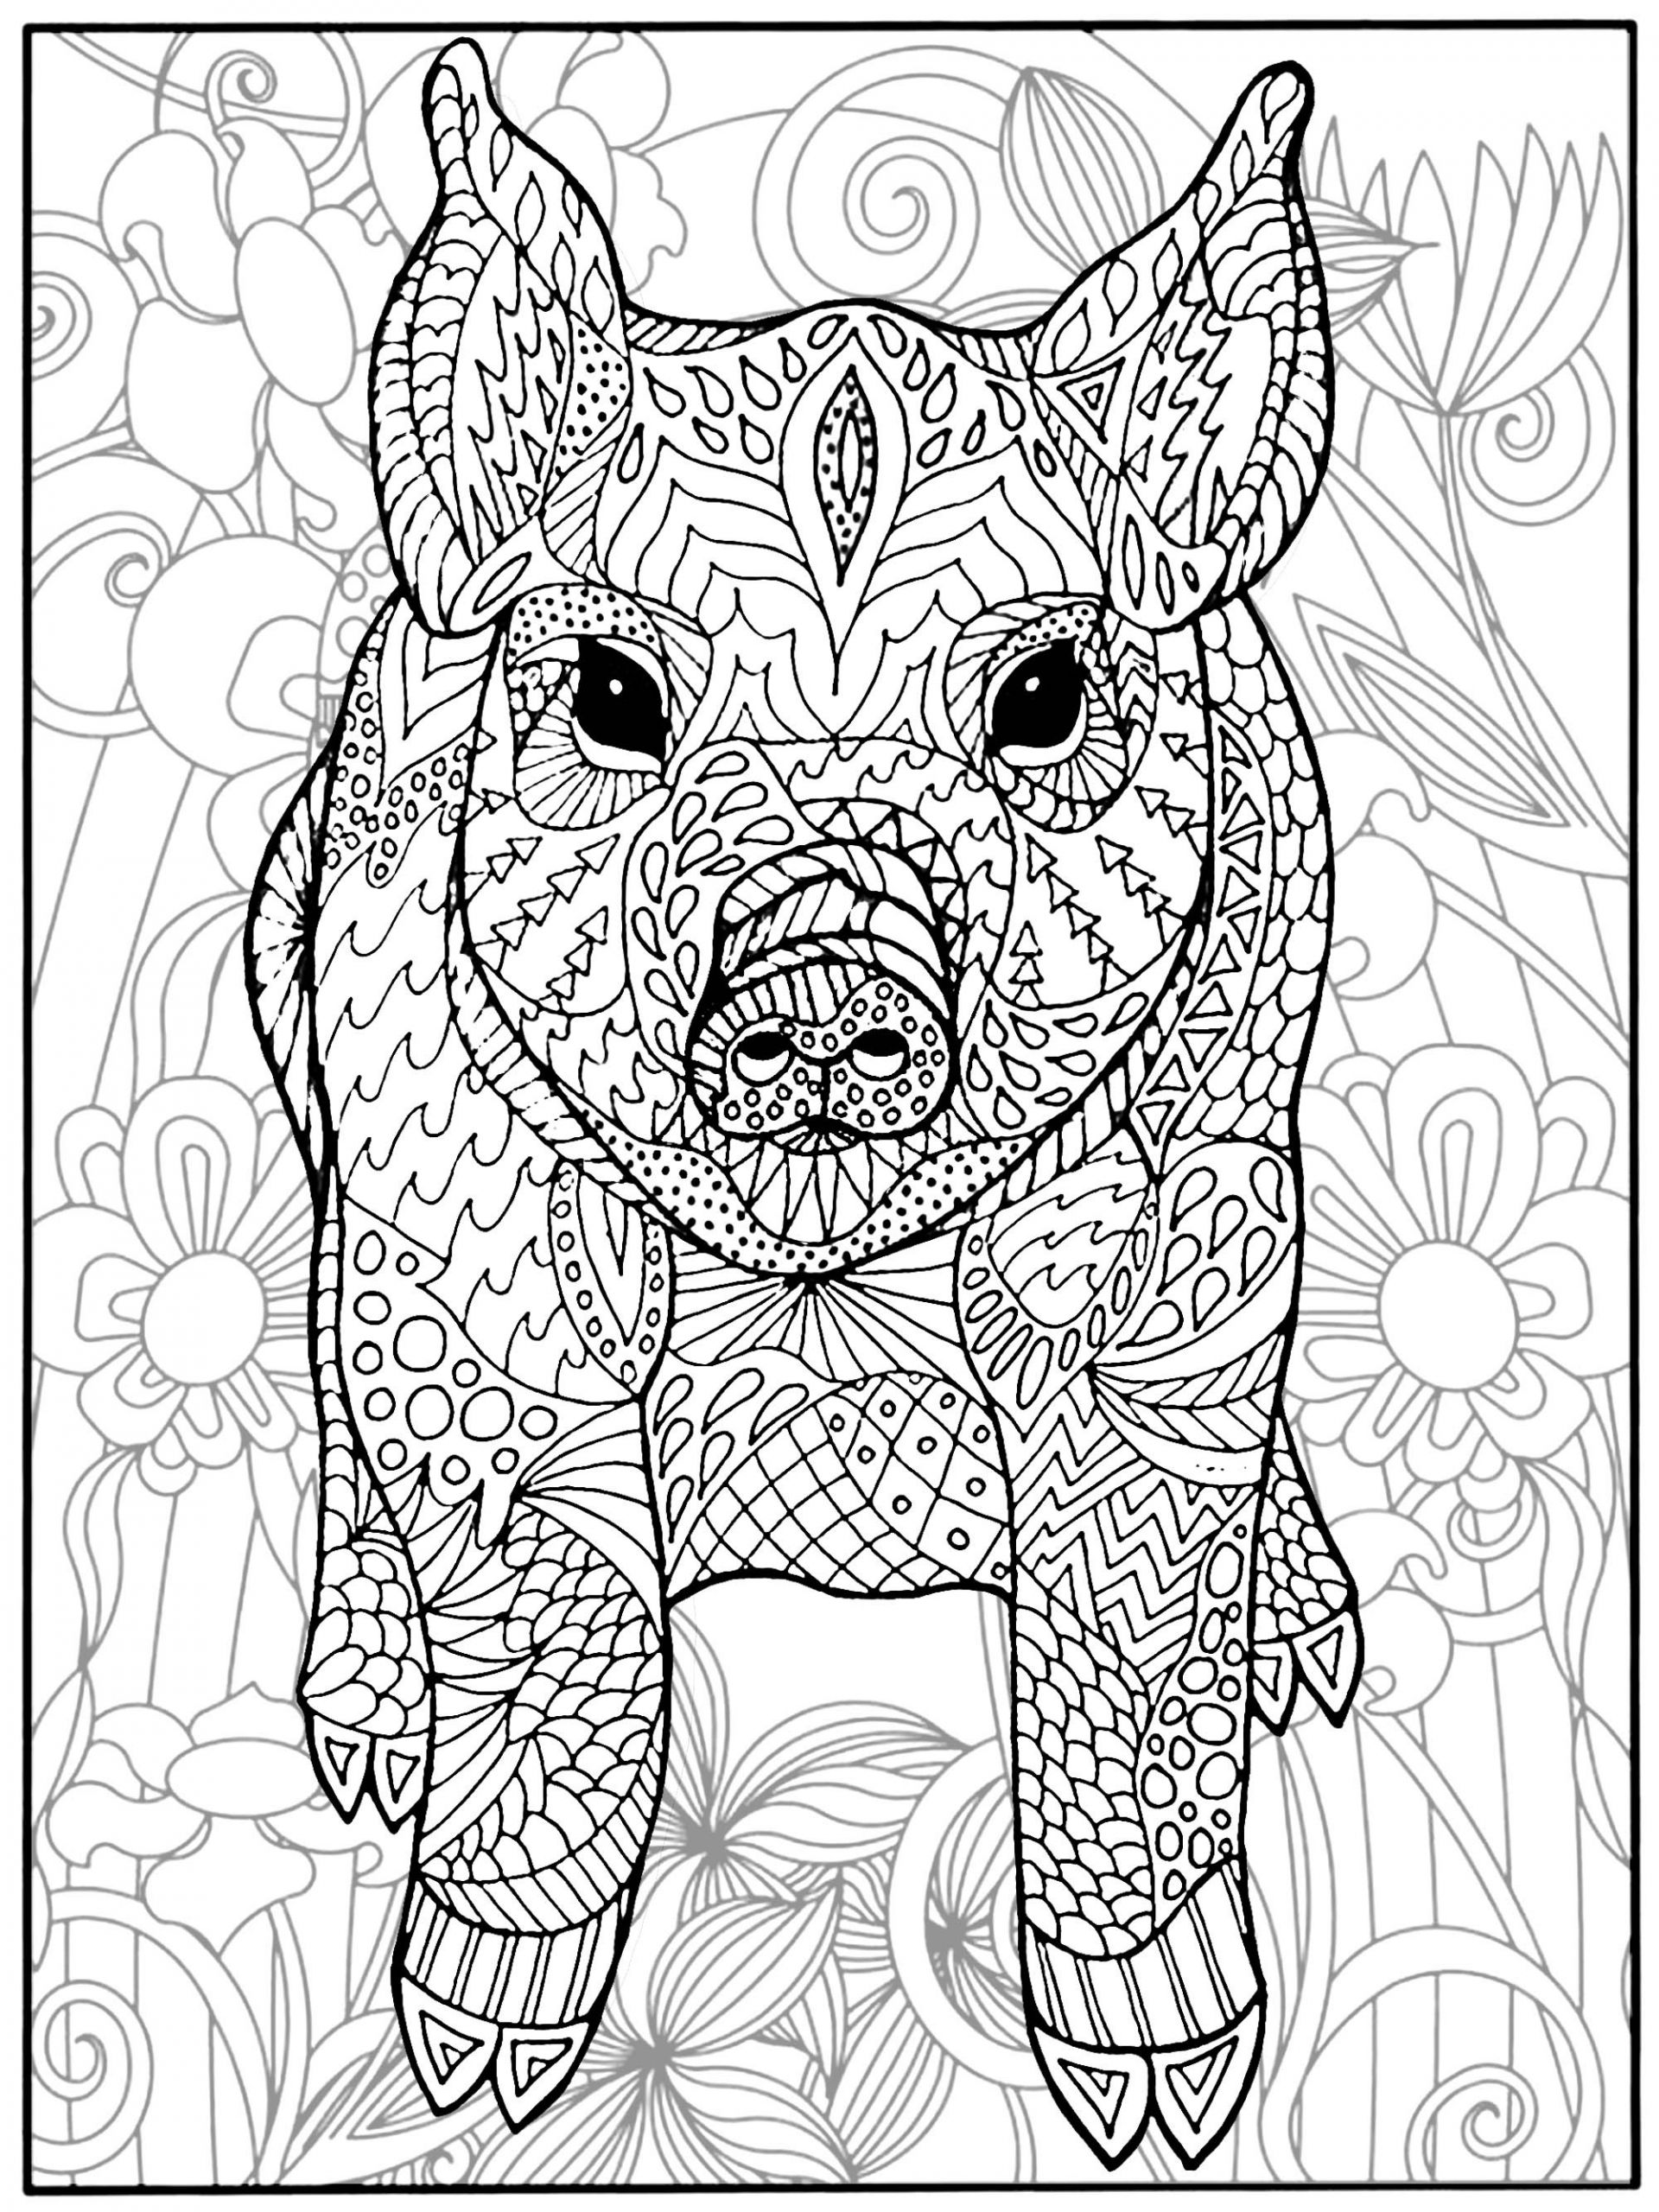 Pig Coloring Pages For Adults
 Pig and flowers Pigs Adult Coloring Pages